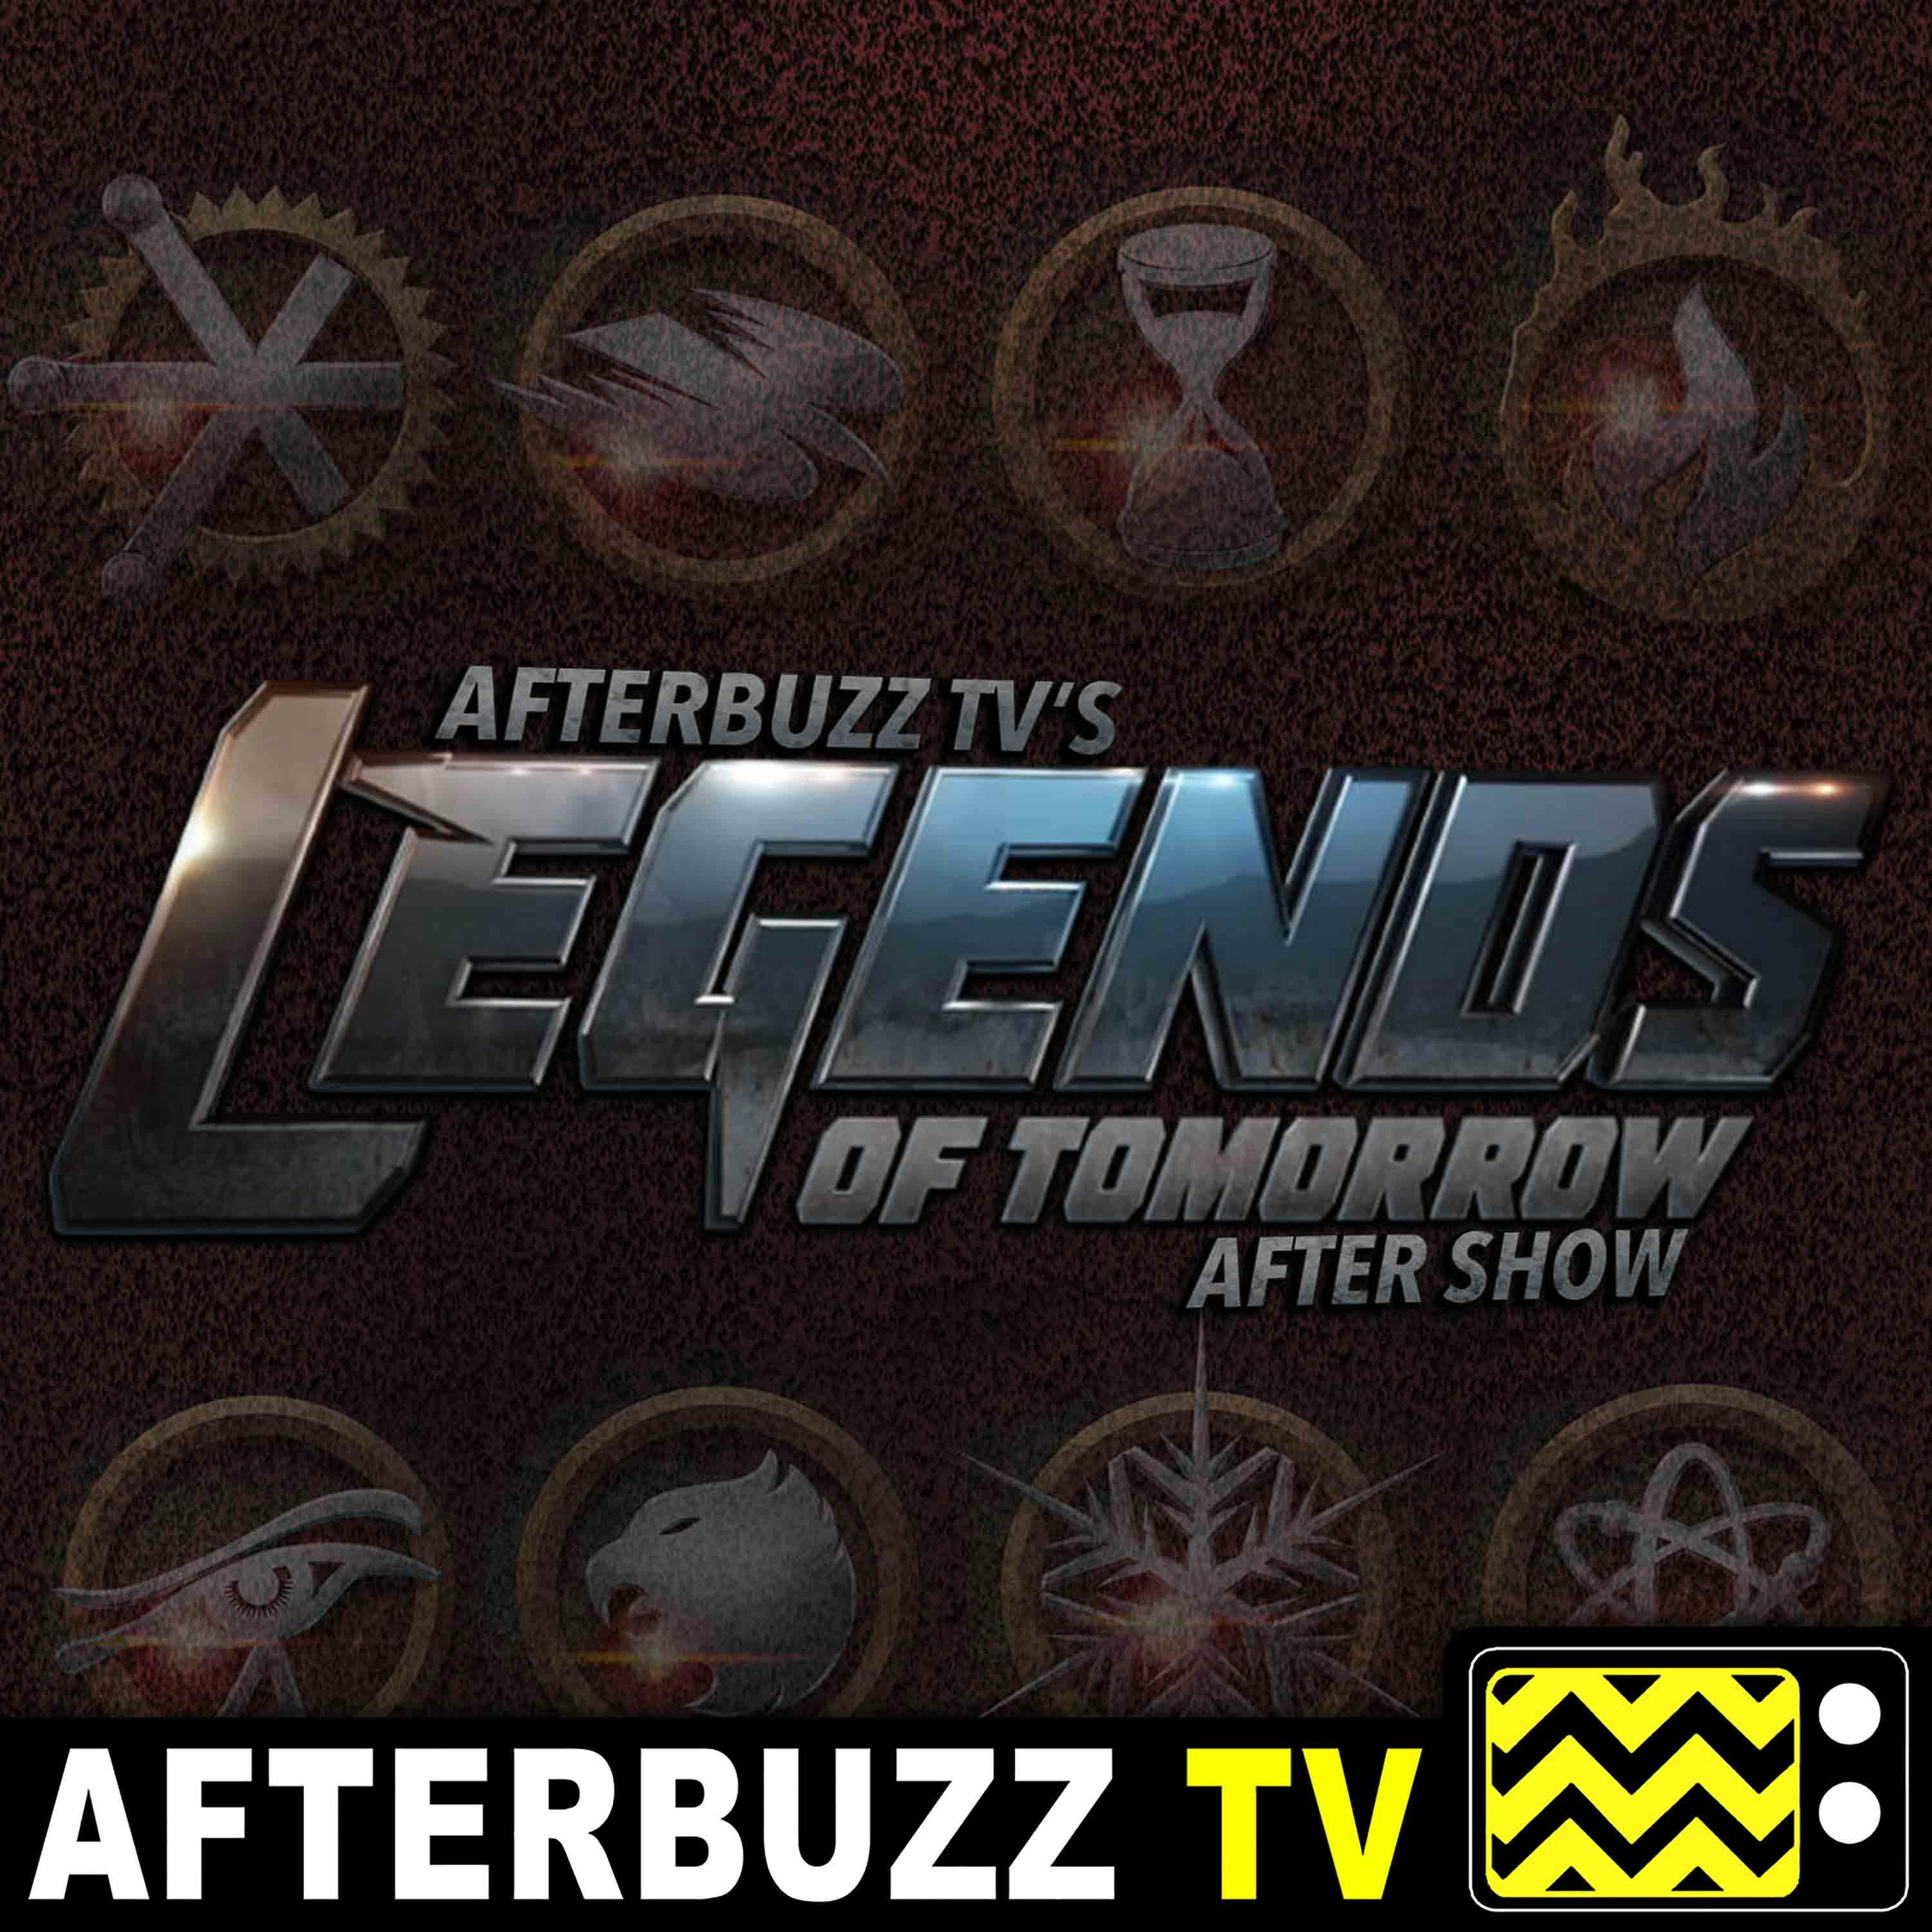 Legends Of Tomorrow S:1 | Star City 2046 E:6 | AfterBuzz TV AfterShow